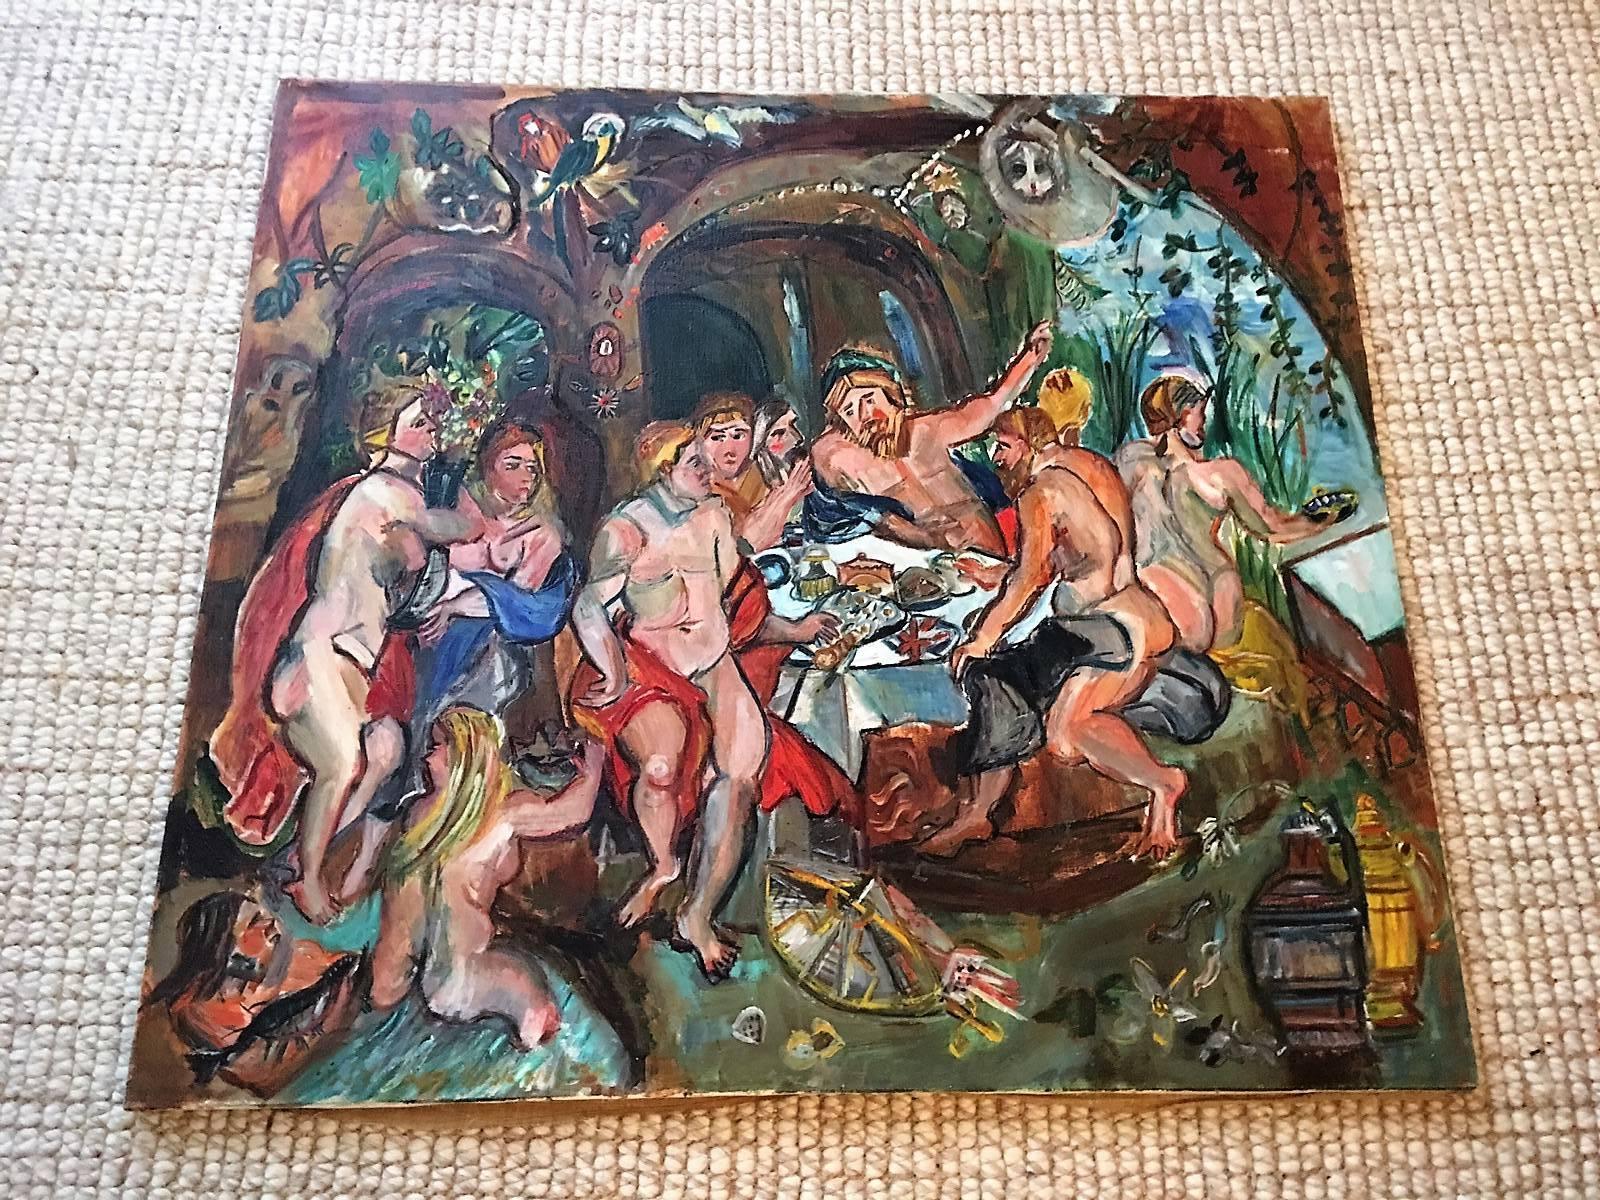 1970s interesting oil painting depicting unclothed warriors with shields near them enjoying a bountiful victory feast with nude maidens in attendance. In the intricate background are parrots, monkeys, trees, a Chameleon and Colorful Foilage. Shields